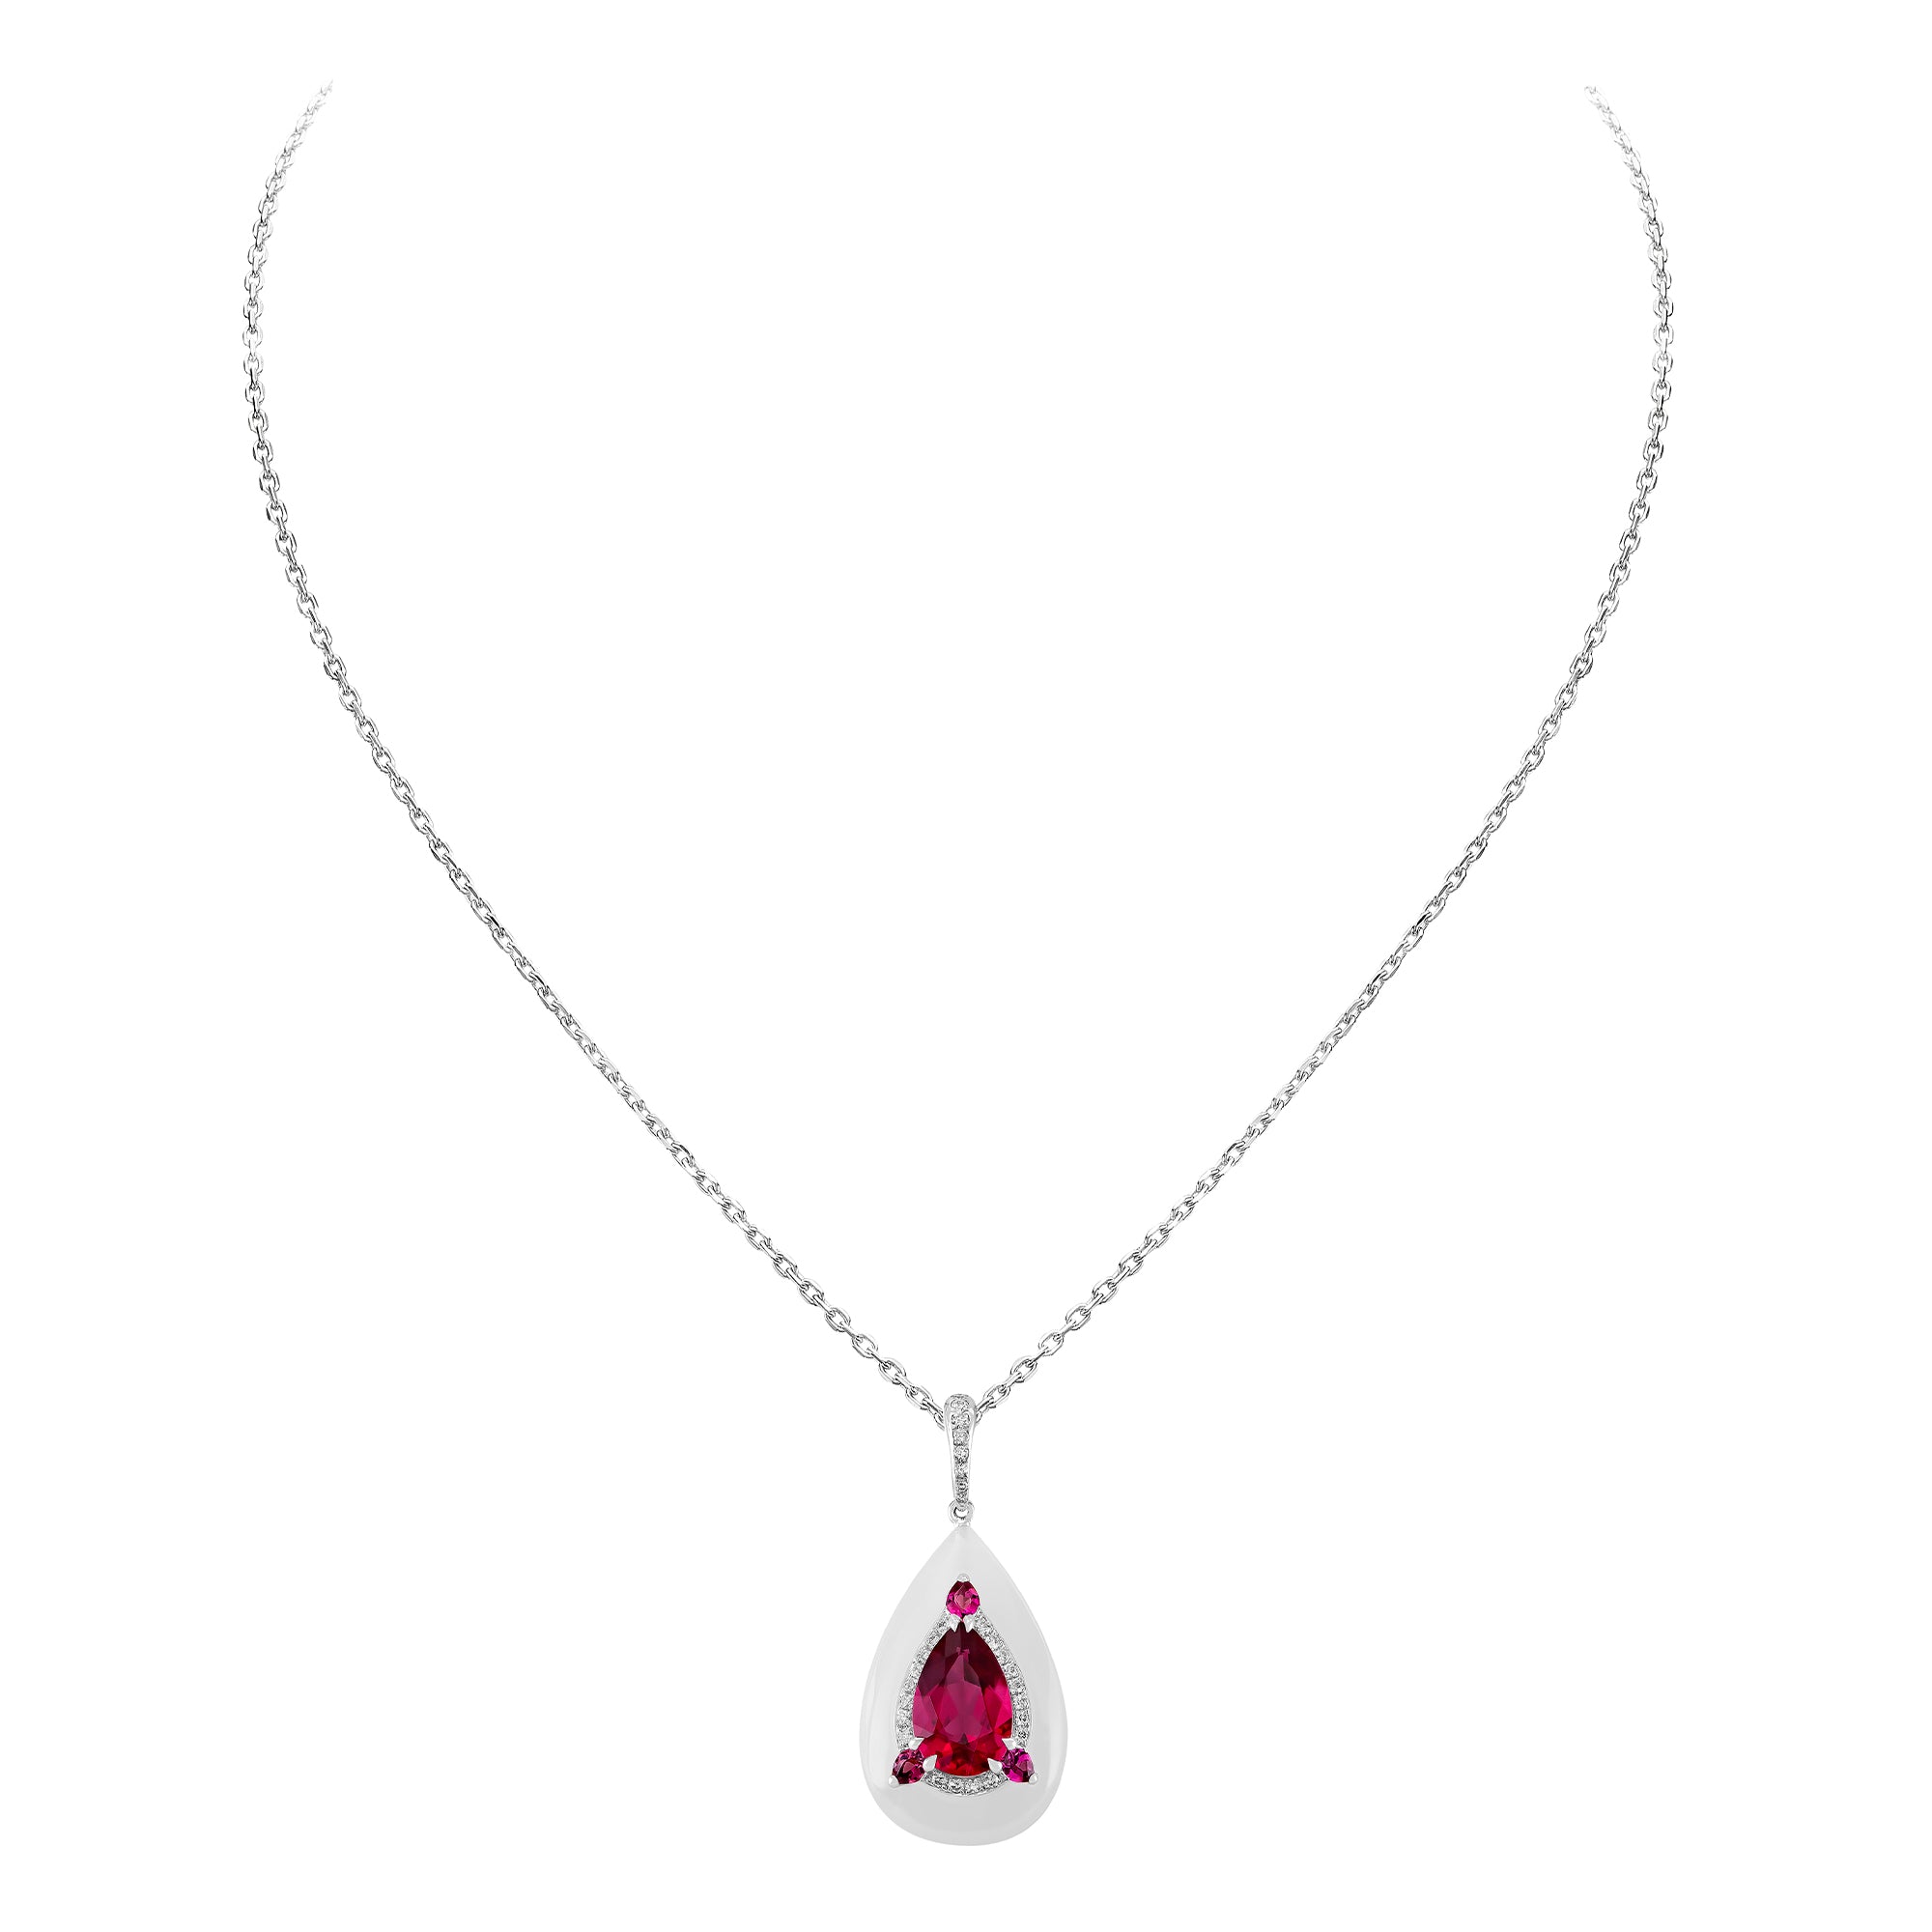 Reveal - Rubellite and White Jade Necklace